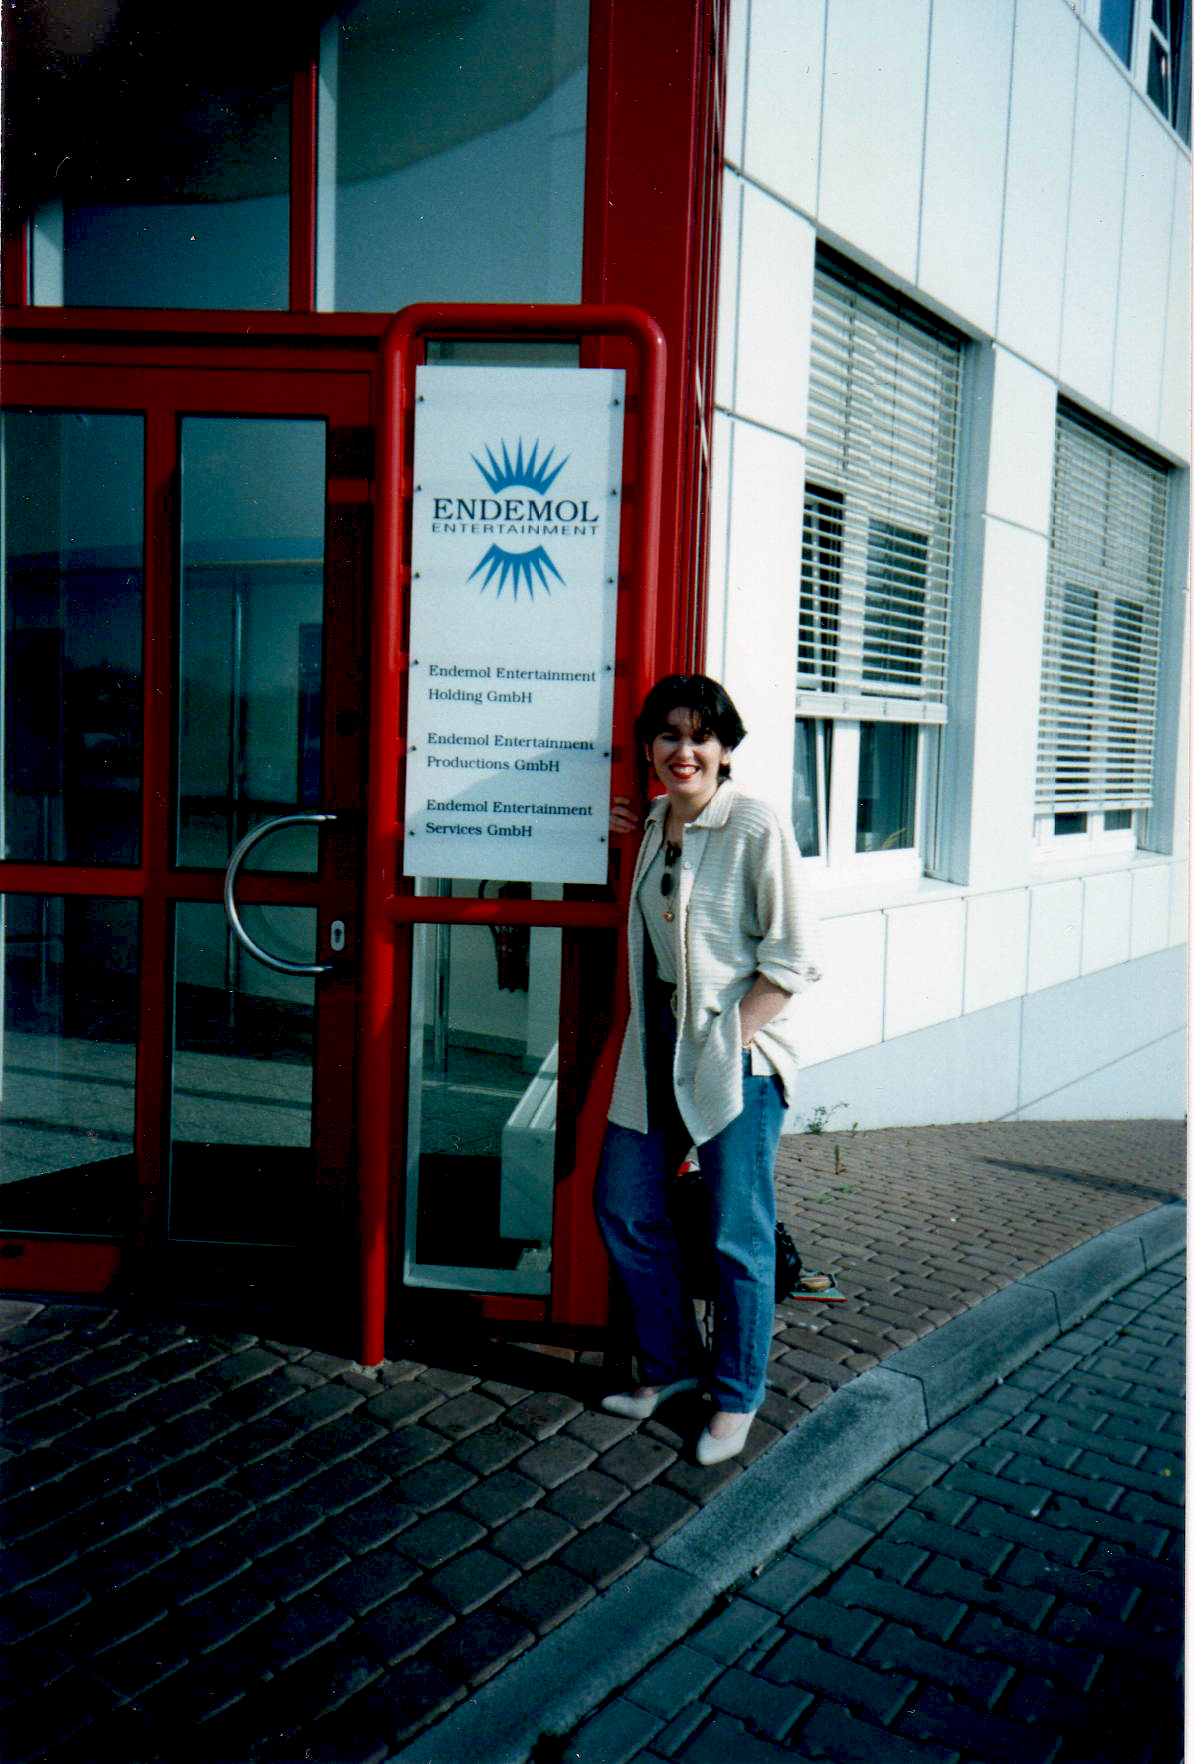 Farnaz Samiinia working for Endemol Entertainment in Germany, Cologne - 1993.